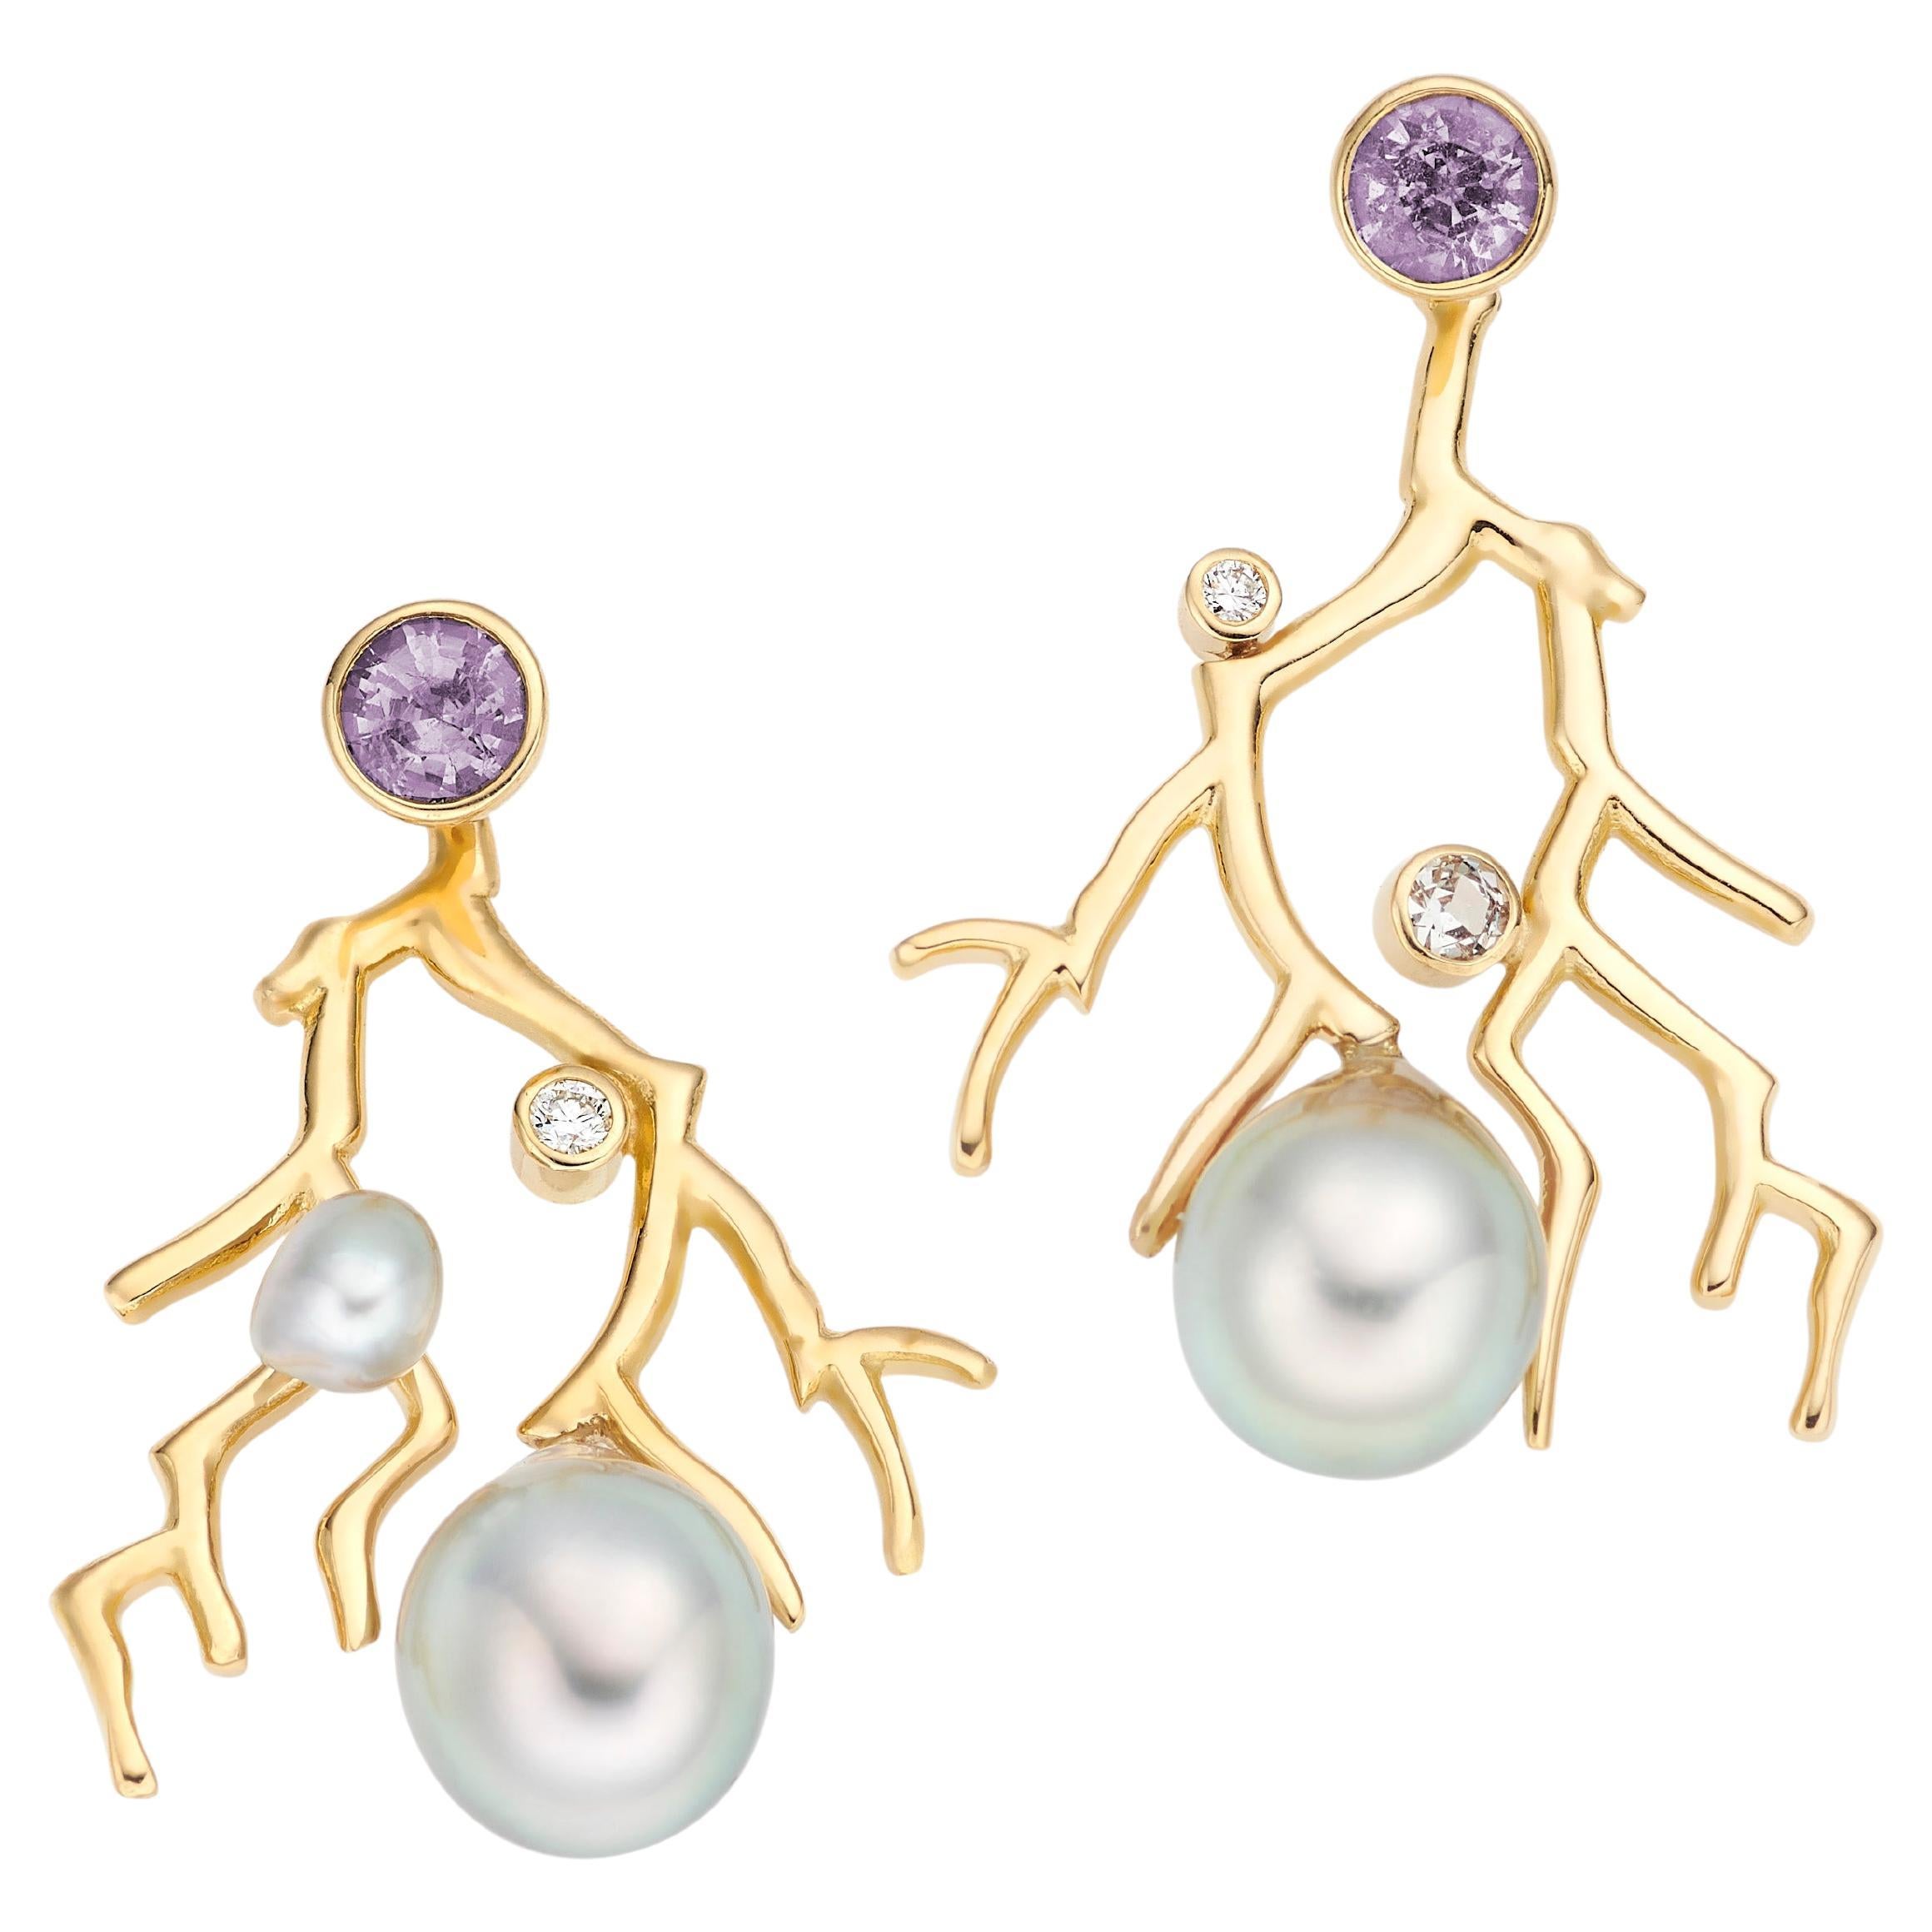 Lilly Hastedt Tahitian Pearl, Spinel and Diamond Coral Earrings